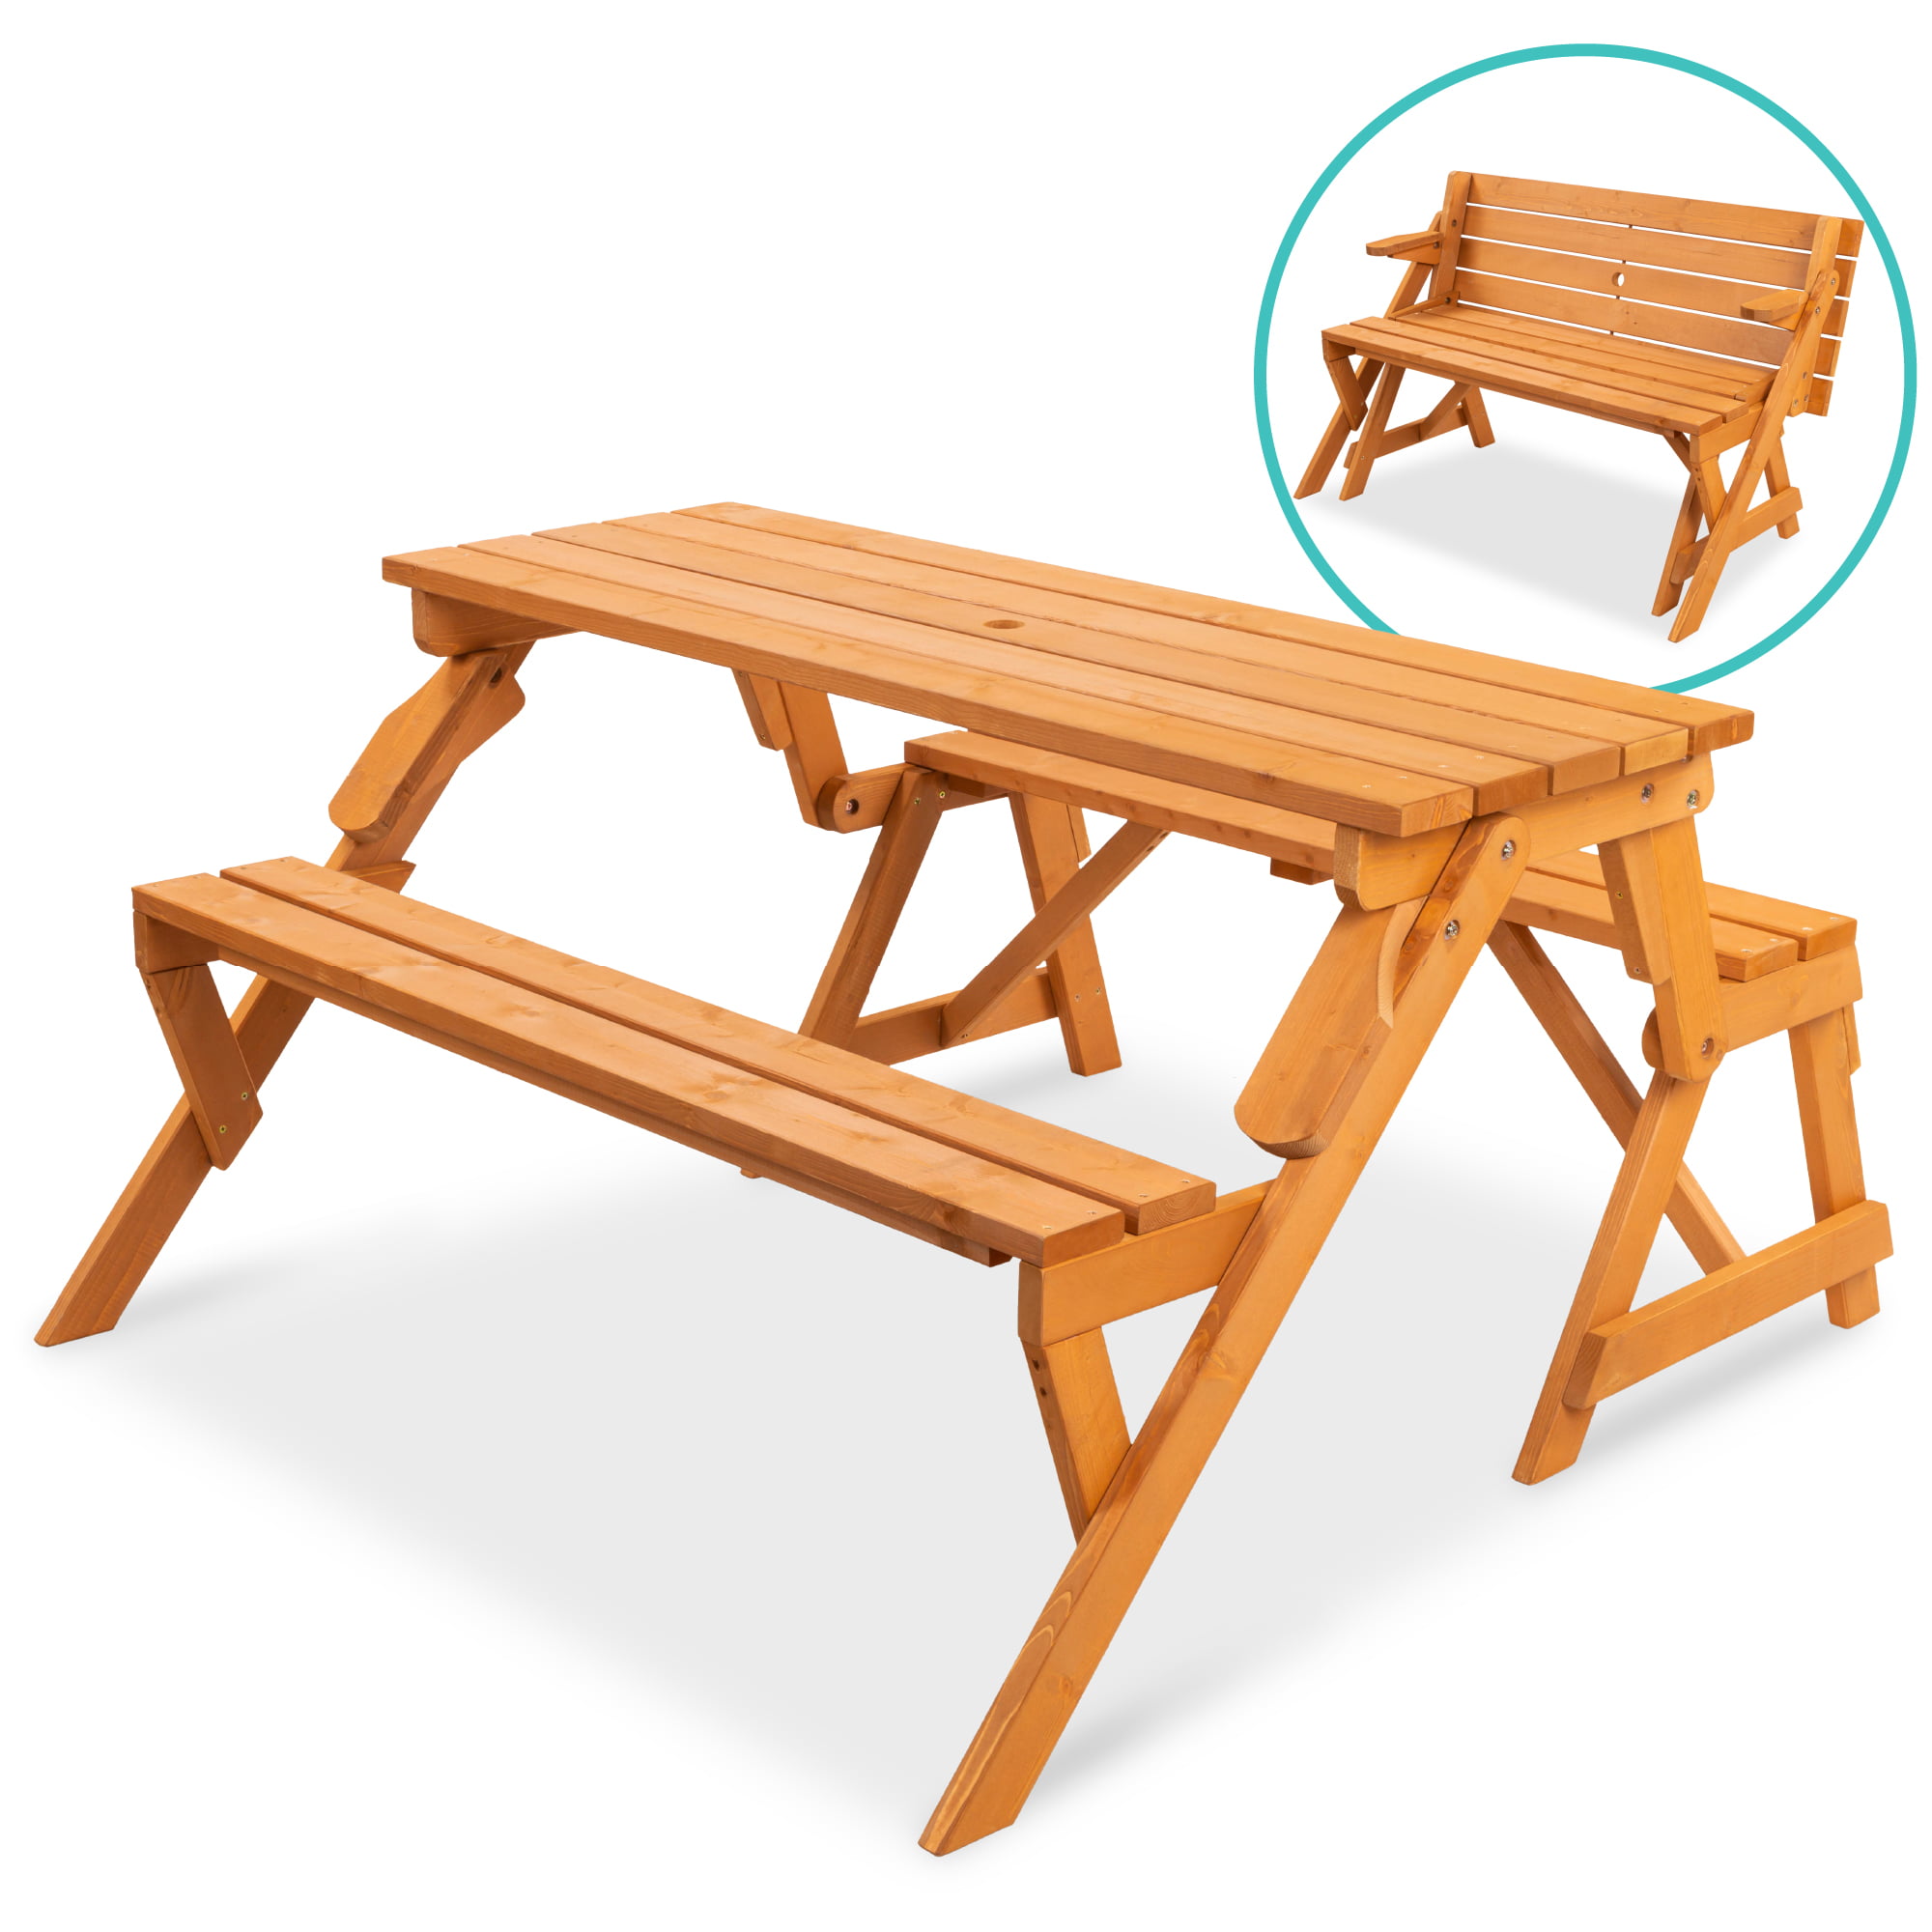 Perfect Patio Combo: Wooden Bench Plans With Built-in End Table